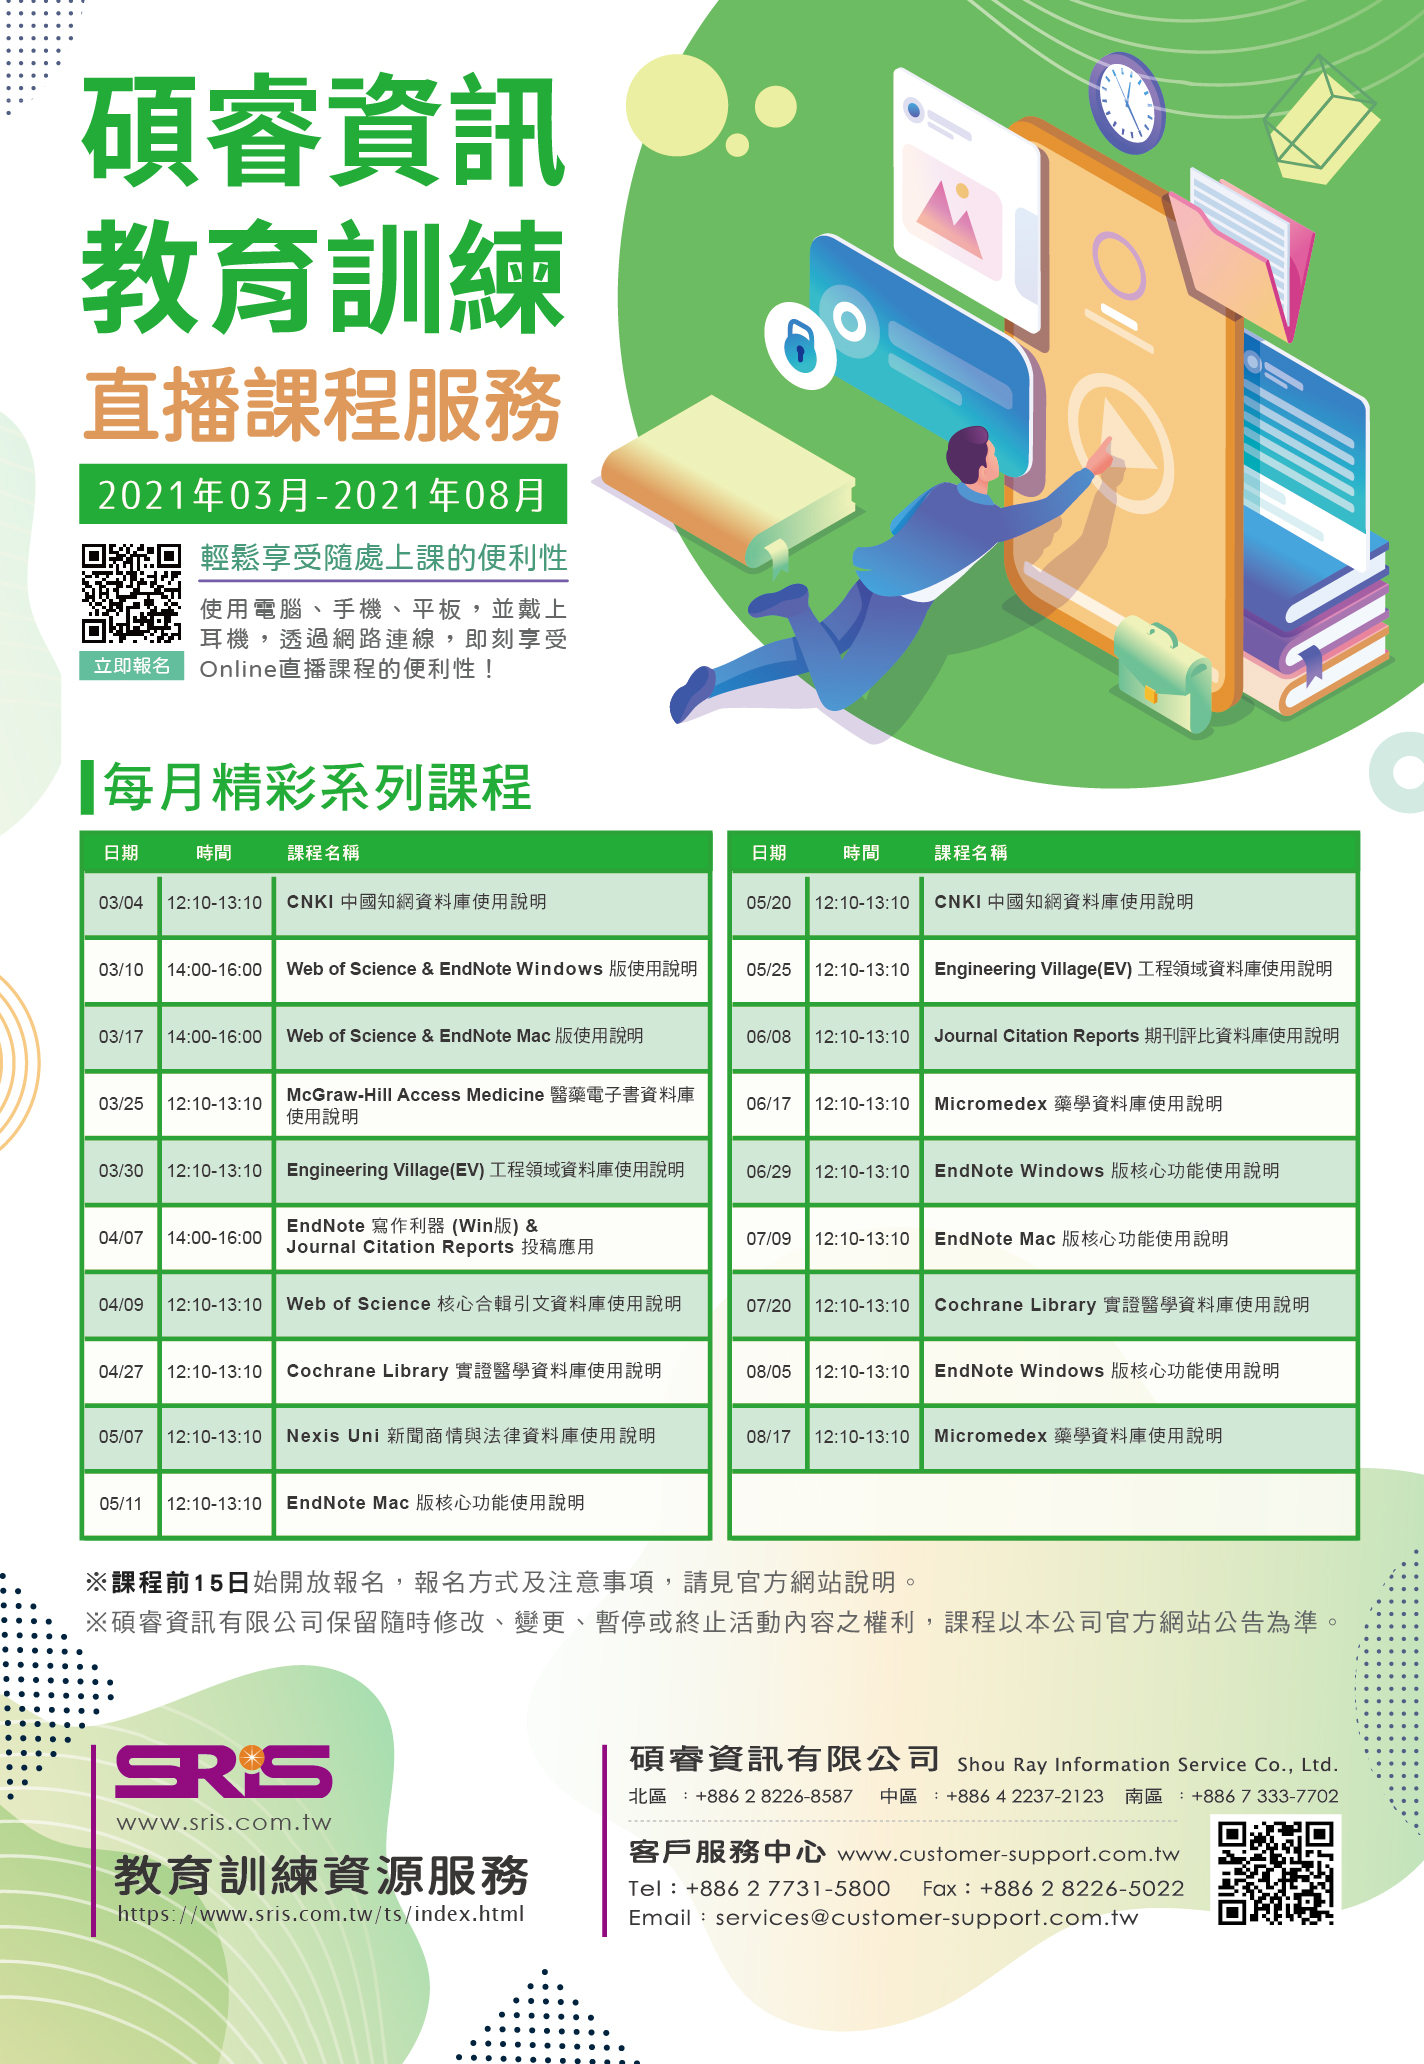 Endnote Core Function Online Training Course (in Chinese)